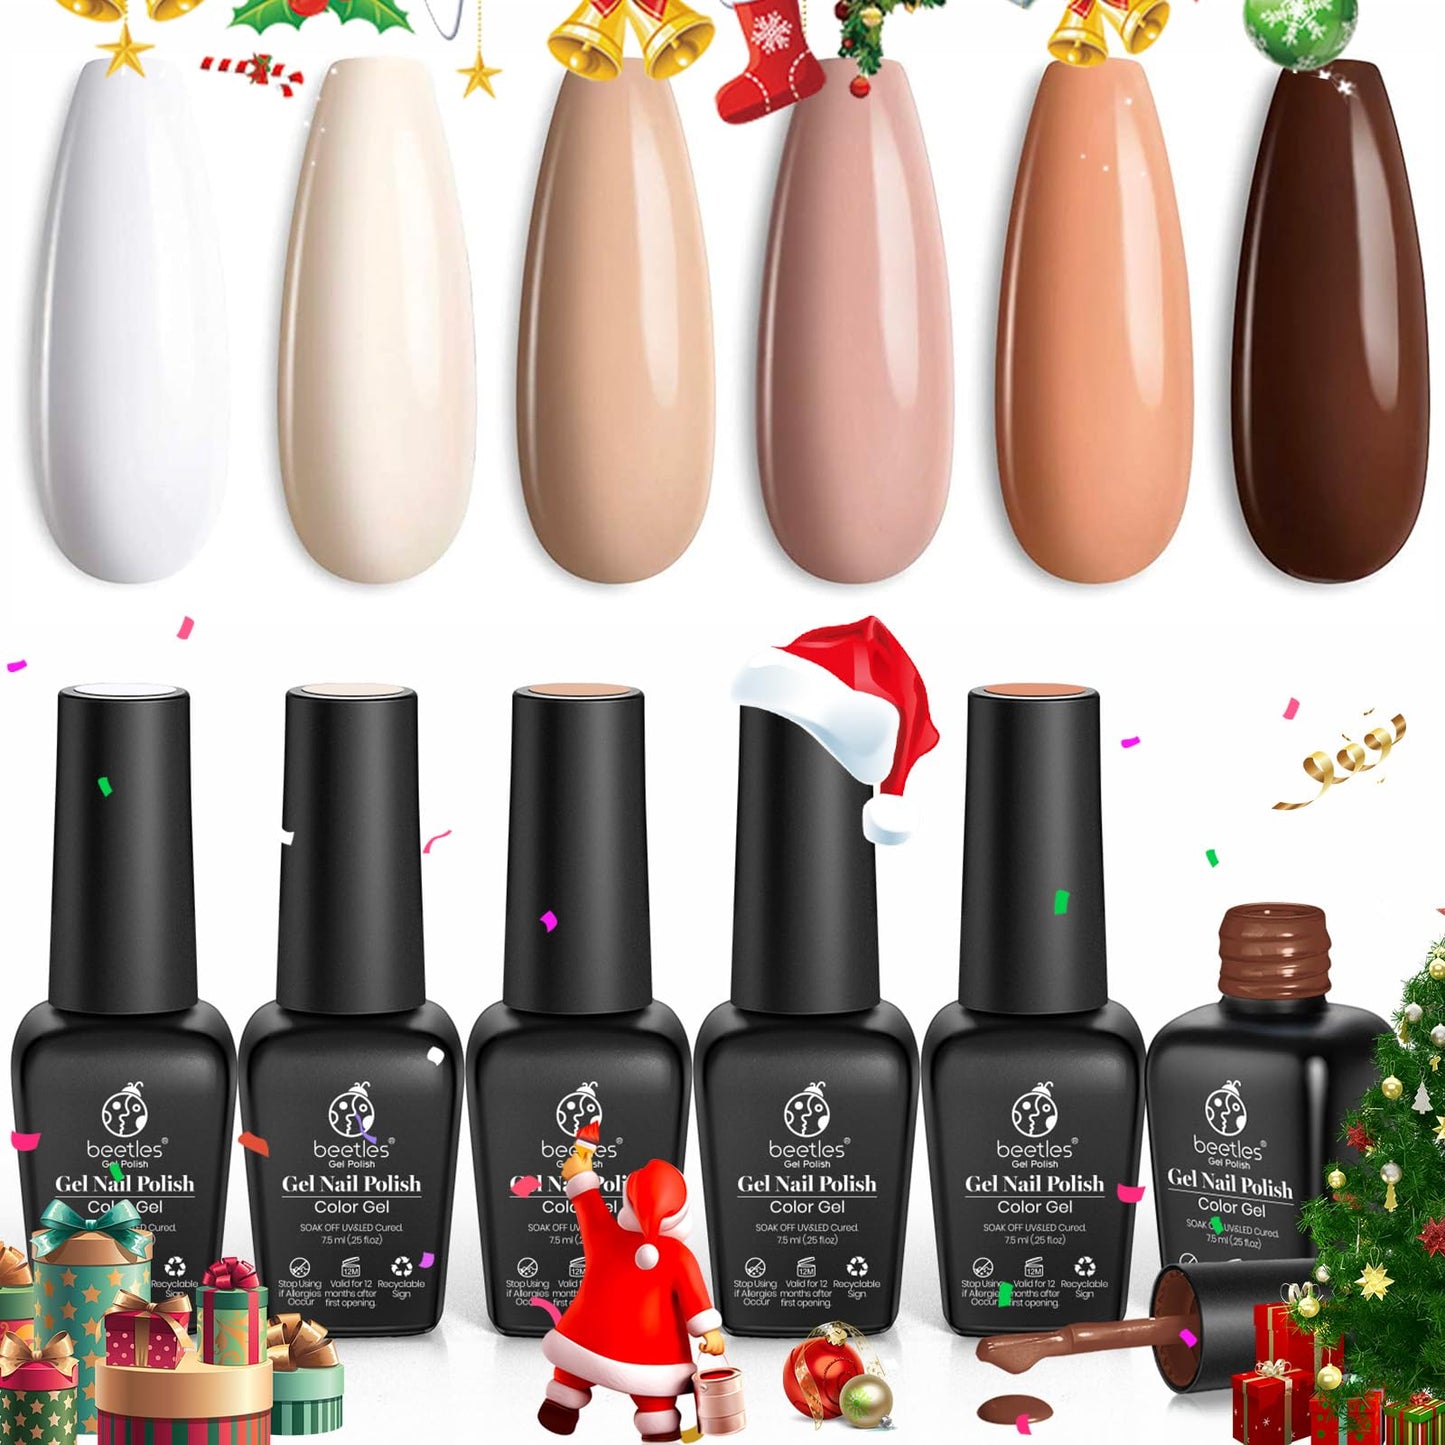 beetles Gel Polish Nail Set 6 Colors Sandstorm Collection Nude Pink Peach Brown Natural Manicure Kit Soak Off Uv Led Lamp Needed for Women Gift Diy Home